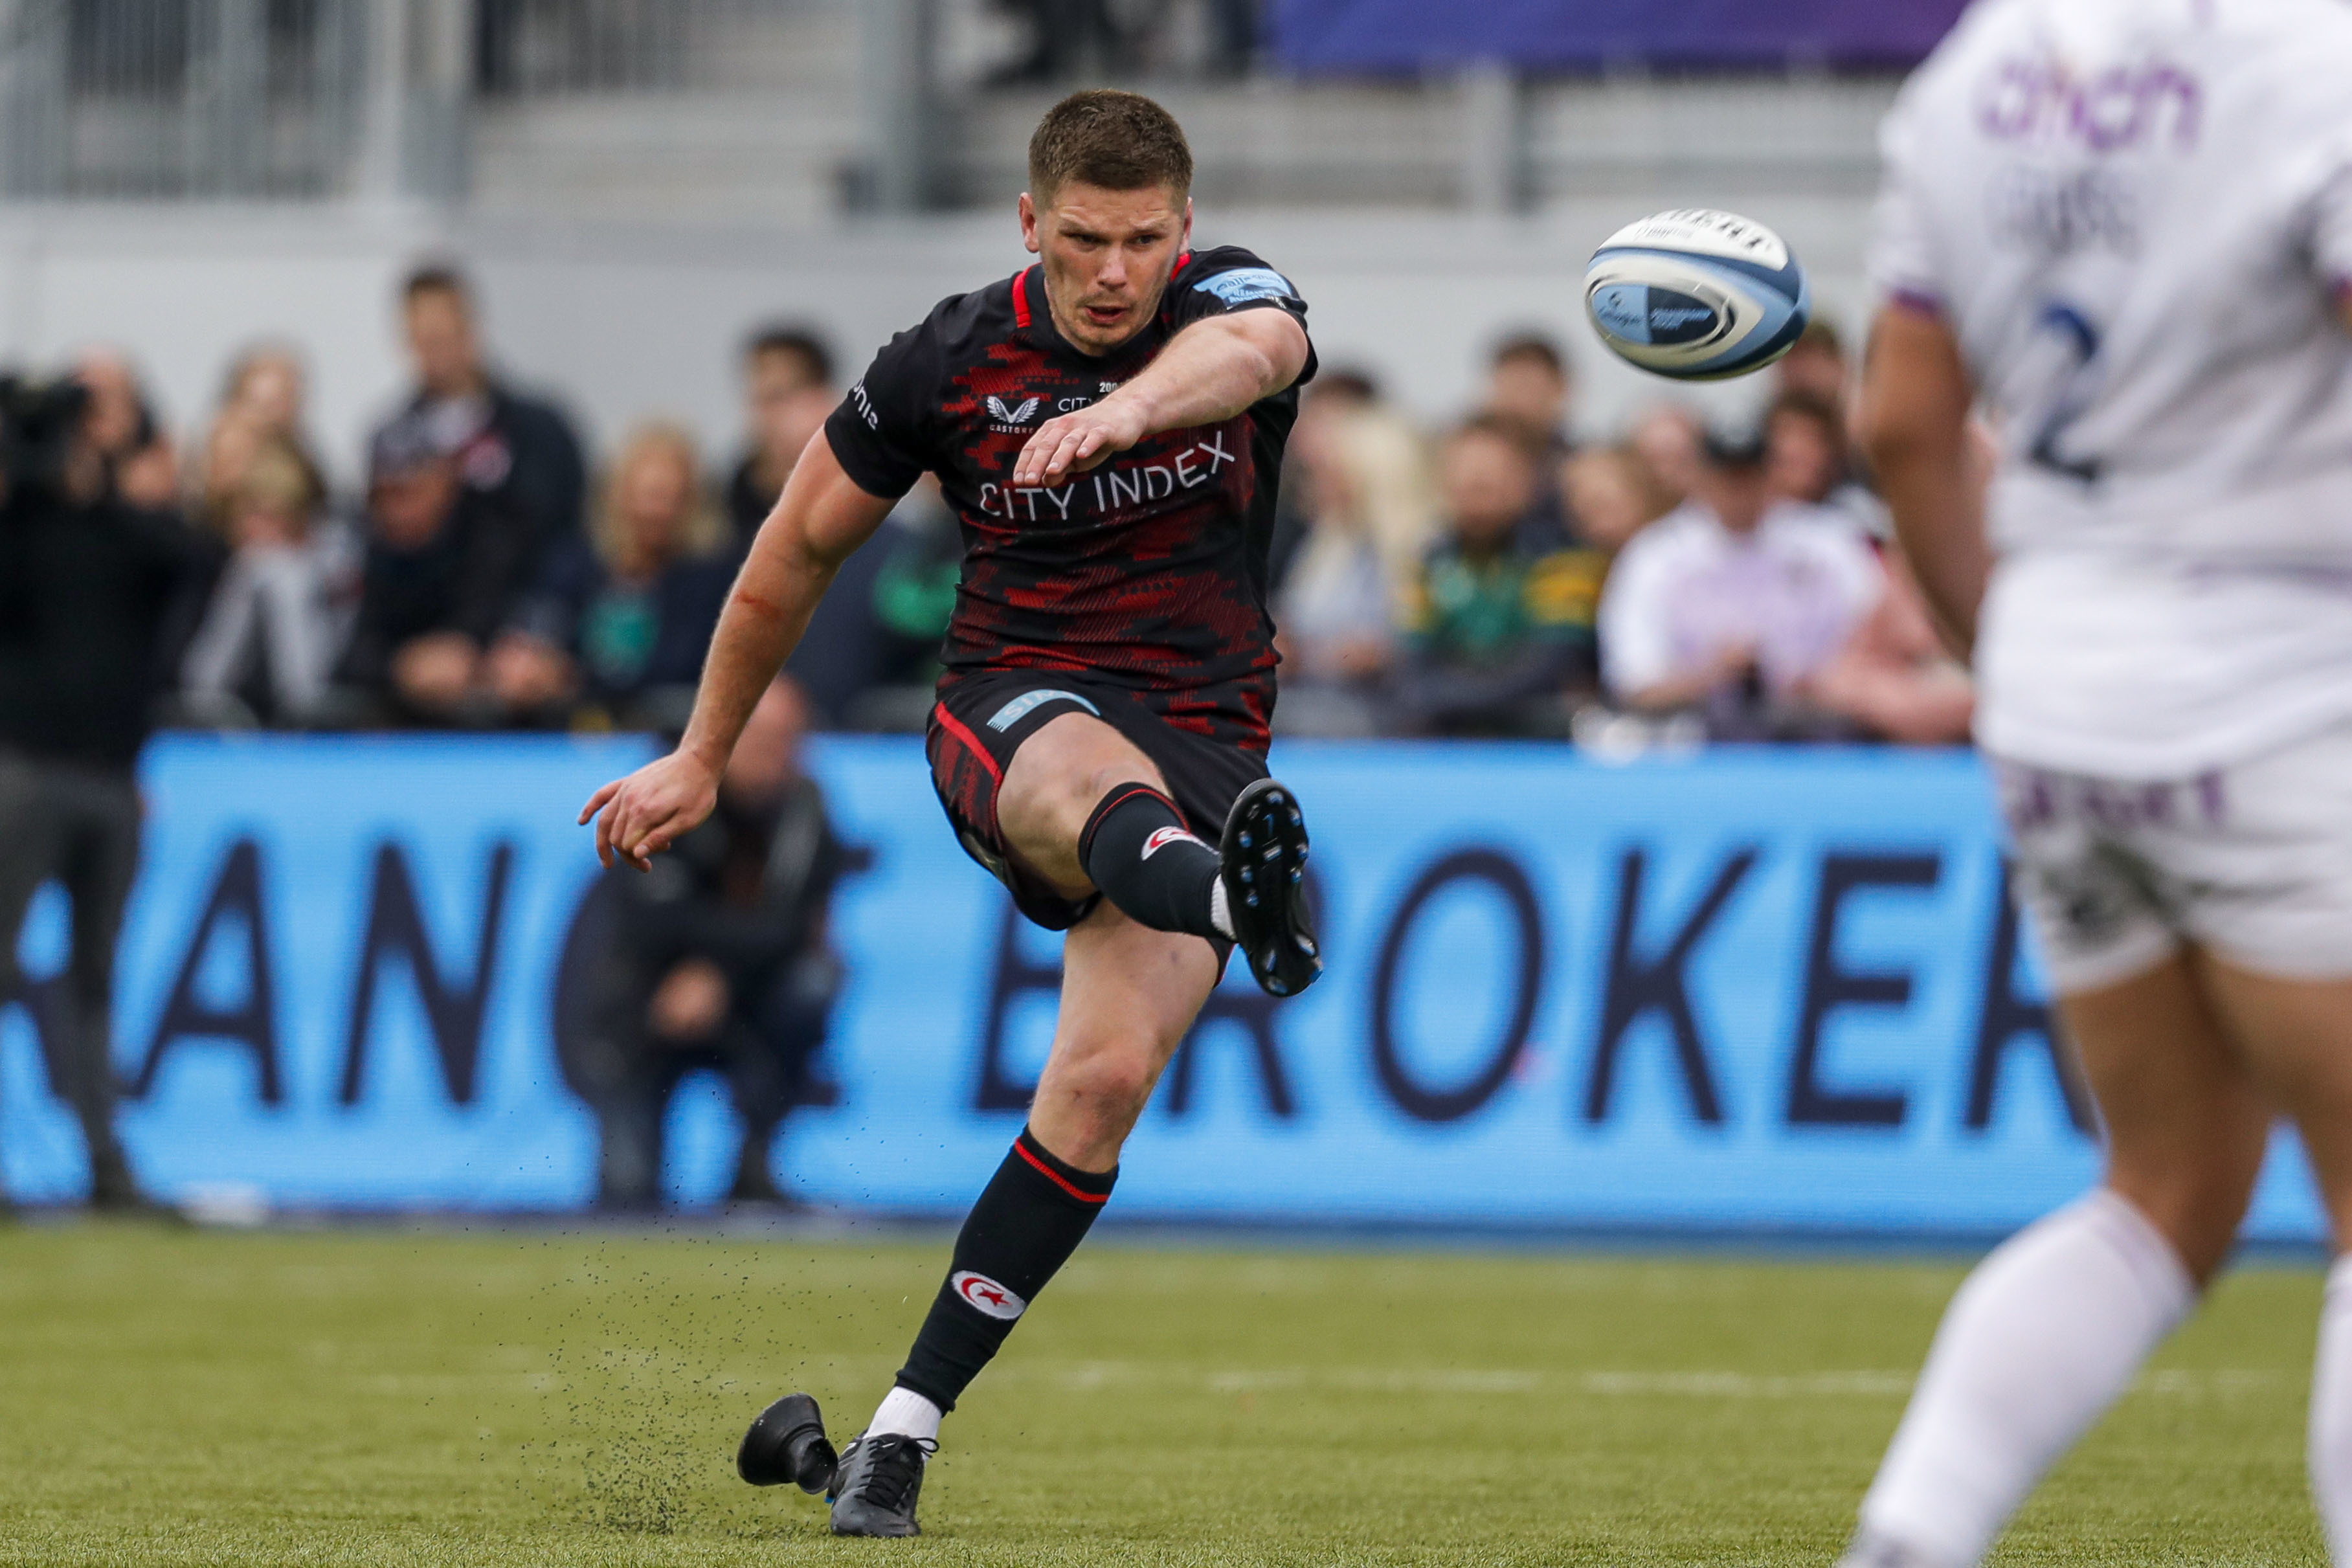 Owen Farrell has helped lead Saracens into another Premiership final